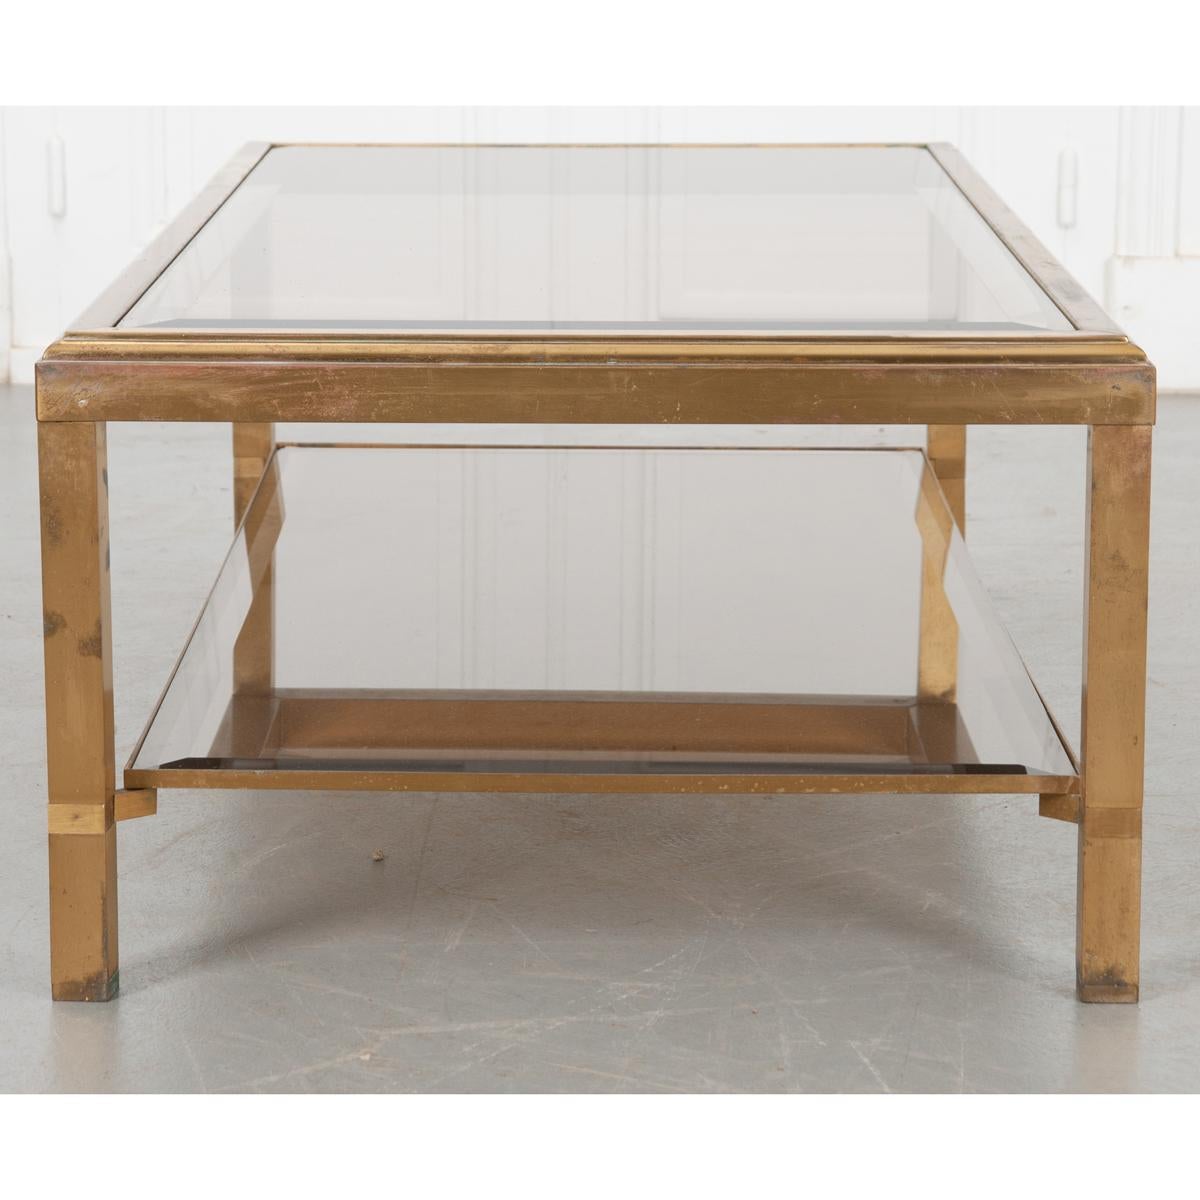 This is a great vintage cocktail table that because of its height works as a coffee table. Top and bottom pieces of tinted glass are beveled providing the perfect surface to display your favorite decor. Both pieces are supported in a rectangular